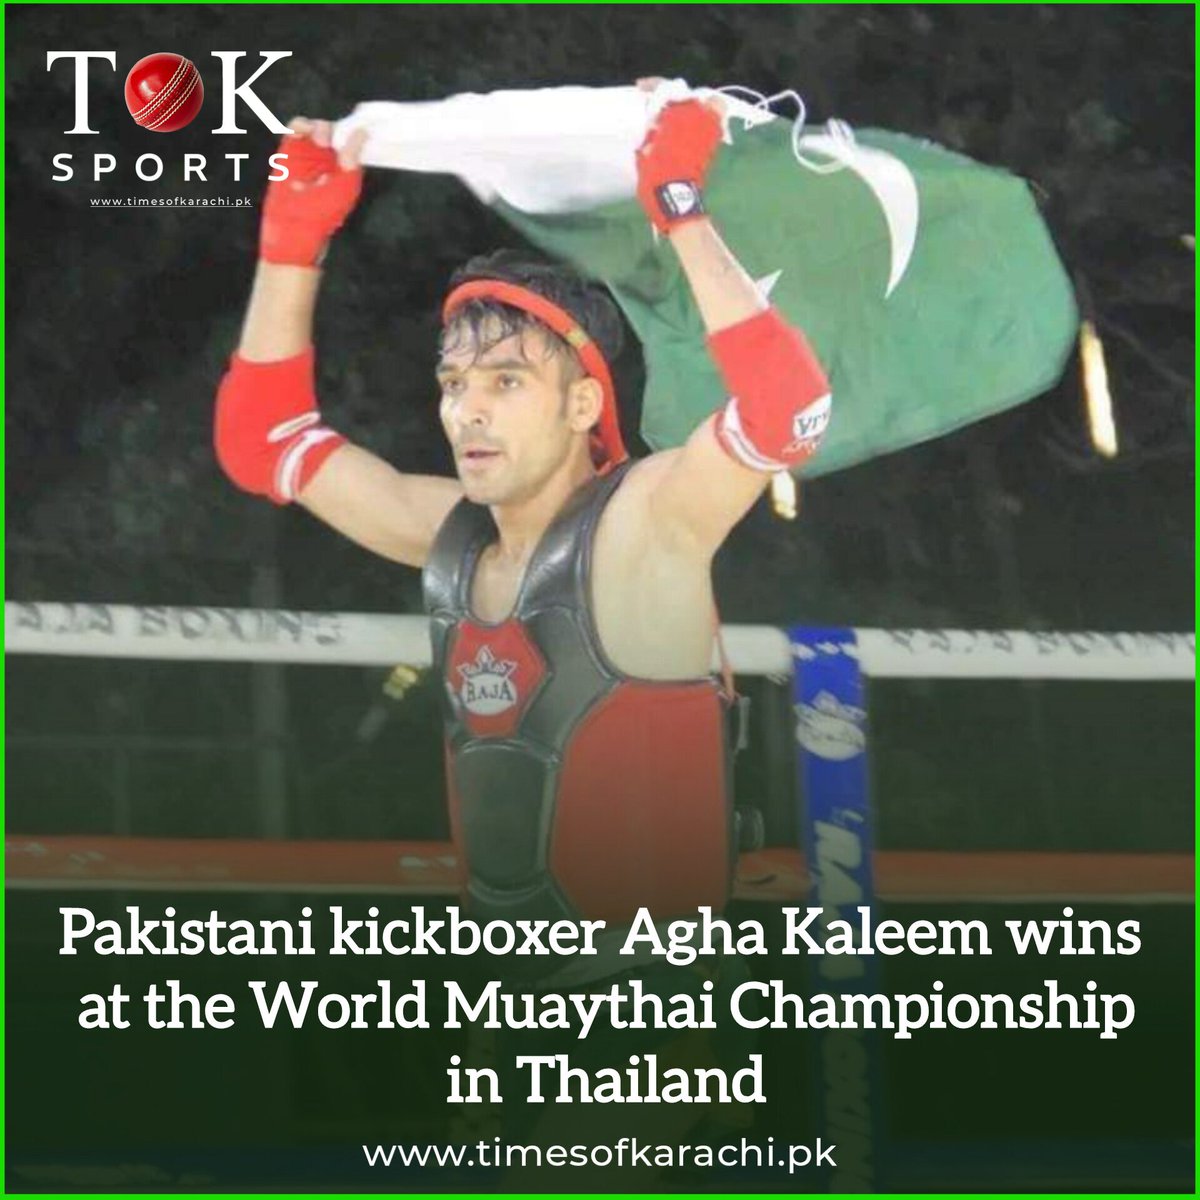 Pakistani kickboxer Agha Kaleem wins at the World Muaythai Championship in Thailand In his first fight, he defeated the two-time world champion from Kyrgyzstan and in the second match, he beat the Nepali player in just 50 seconds #TOKSports #AghaKaleem #KickBoxer